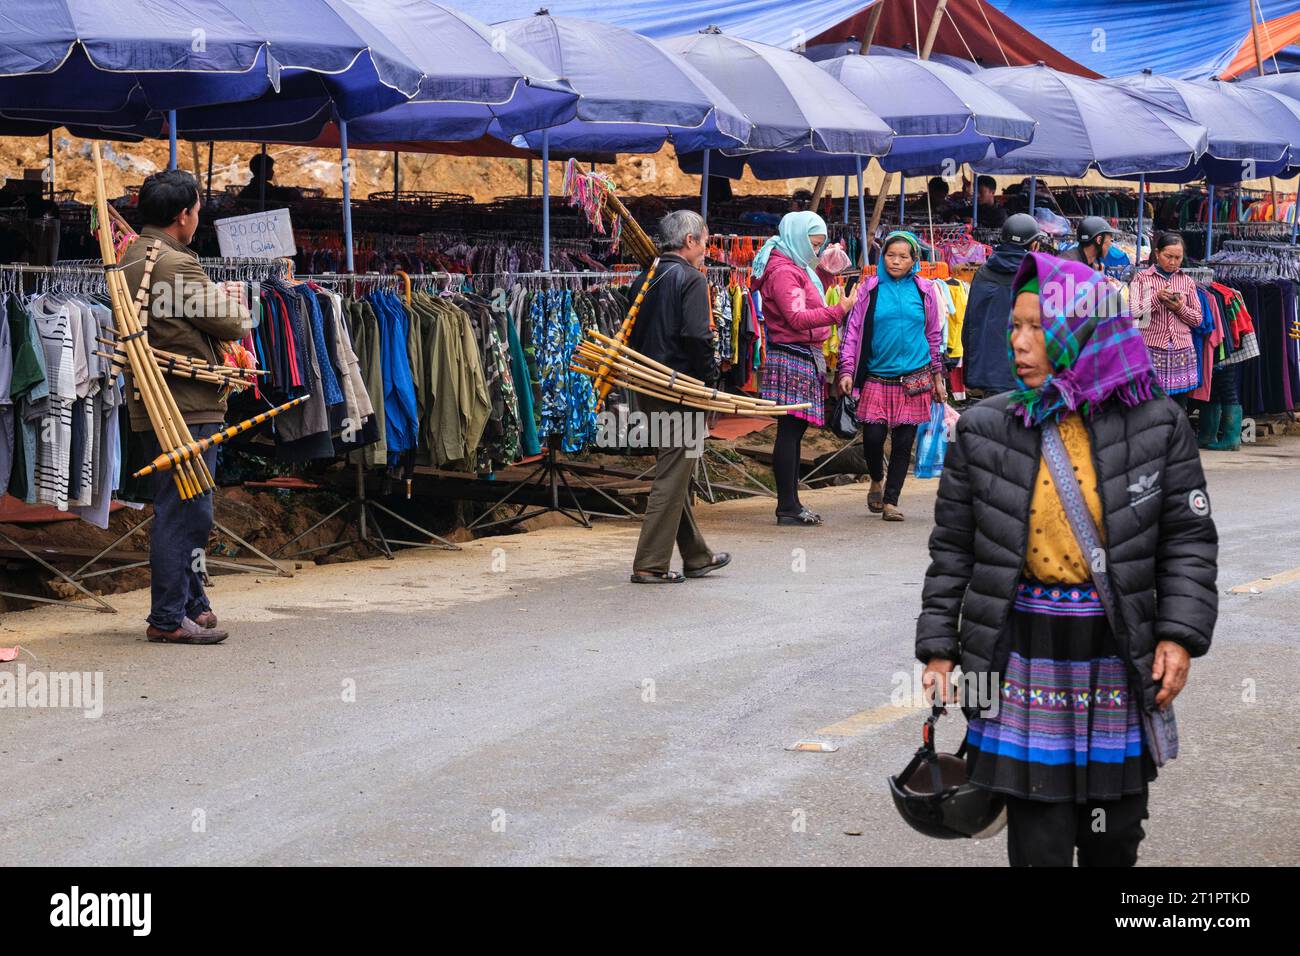 Can Cau Market Scene, Vietnam. Hmong Men with Traditional Wind Instruments, the Khen Mong, or Qeej. Lao Cai Province. Stock Photo